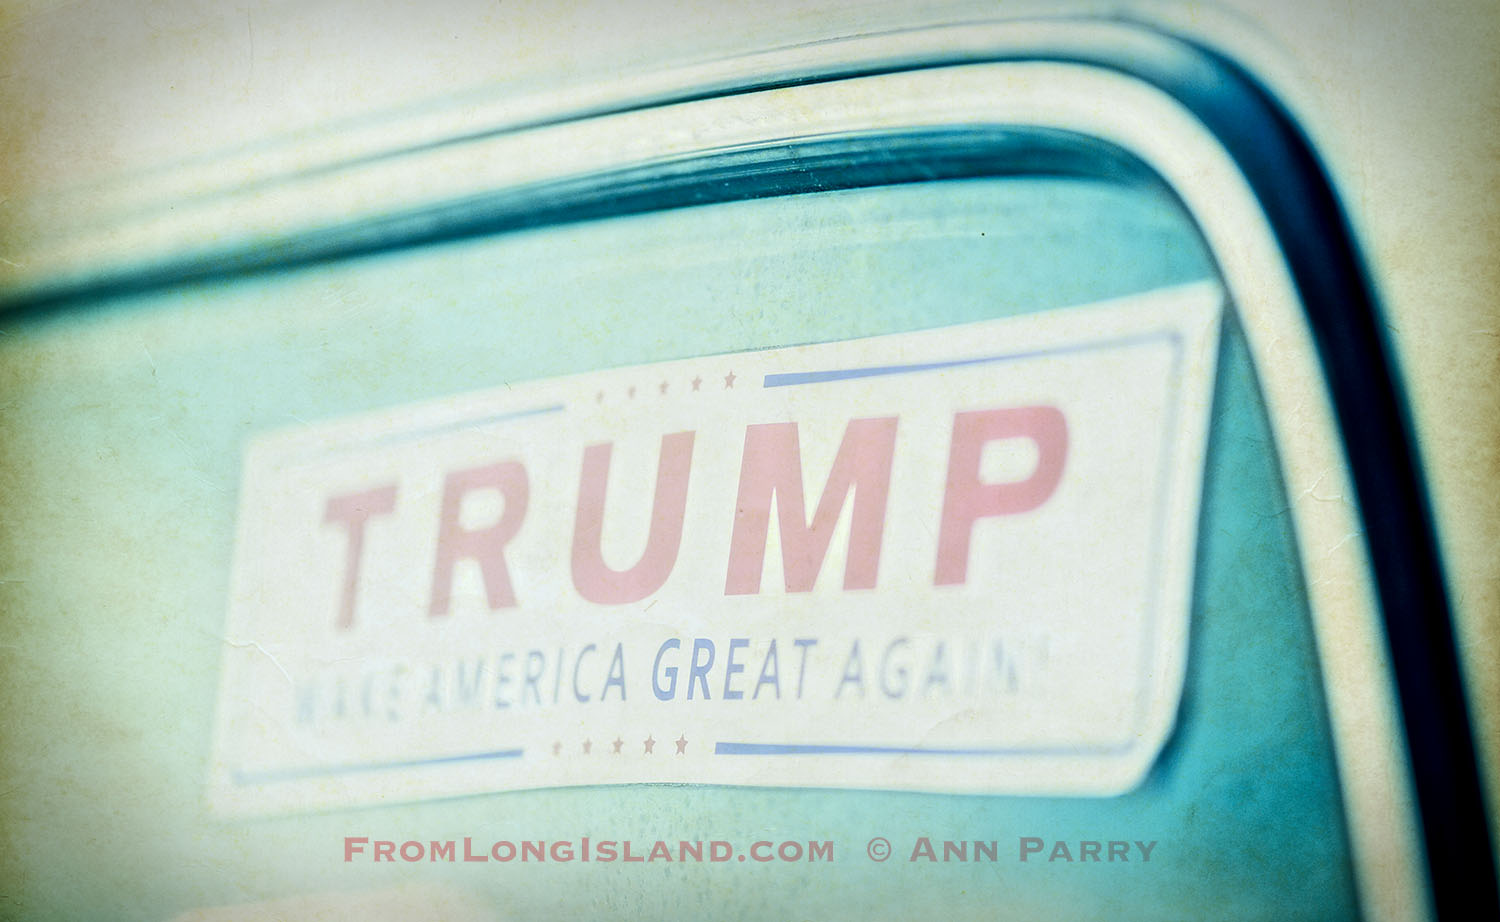 Bellmore, New York, USA. August 11, 2017. At the Bellmore Friday Night Car Show, a Trump Make American Great Again sticker is in rear windshield of a white pickup truck.